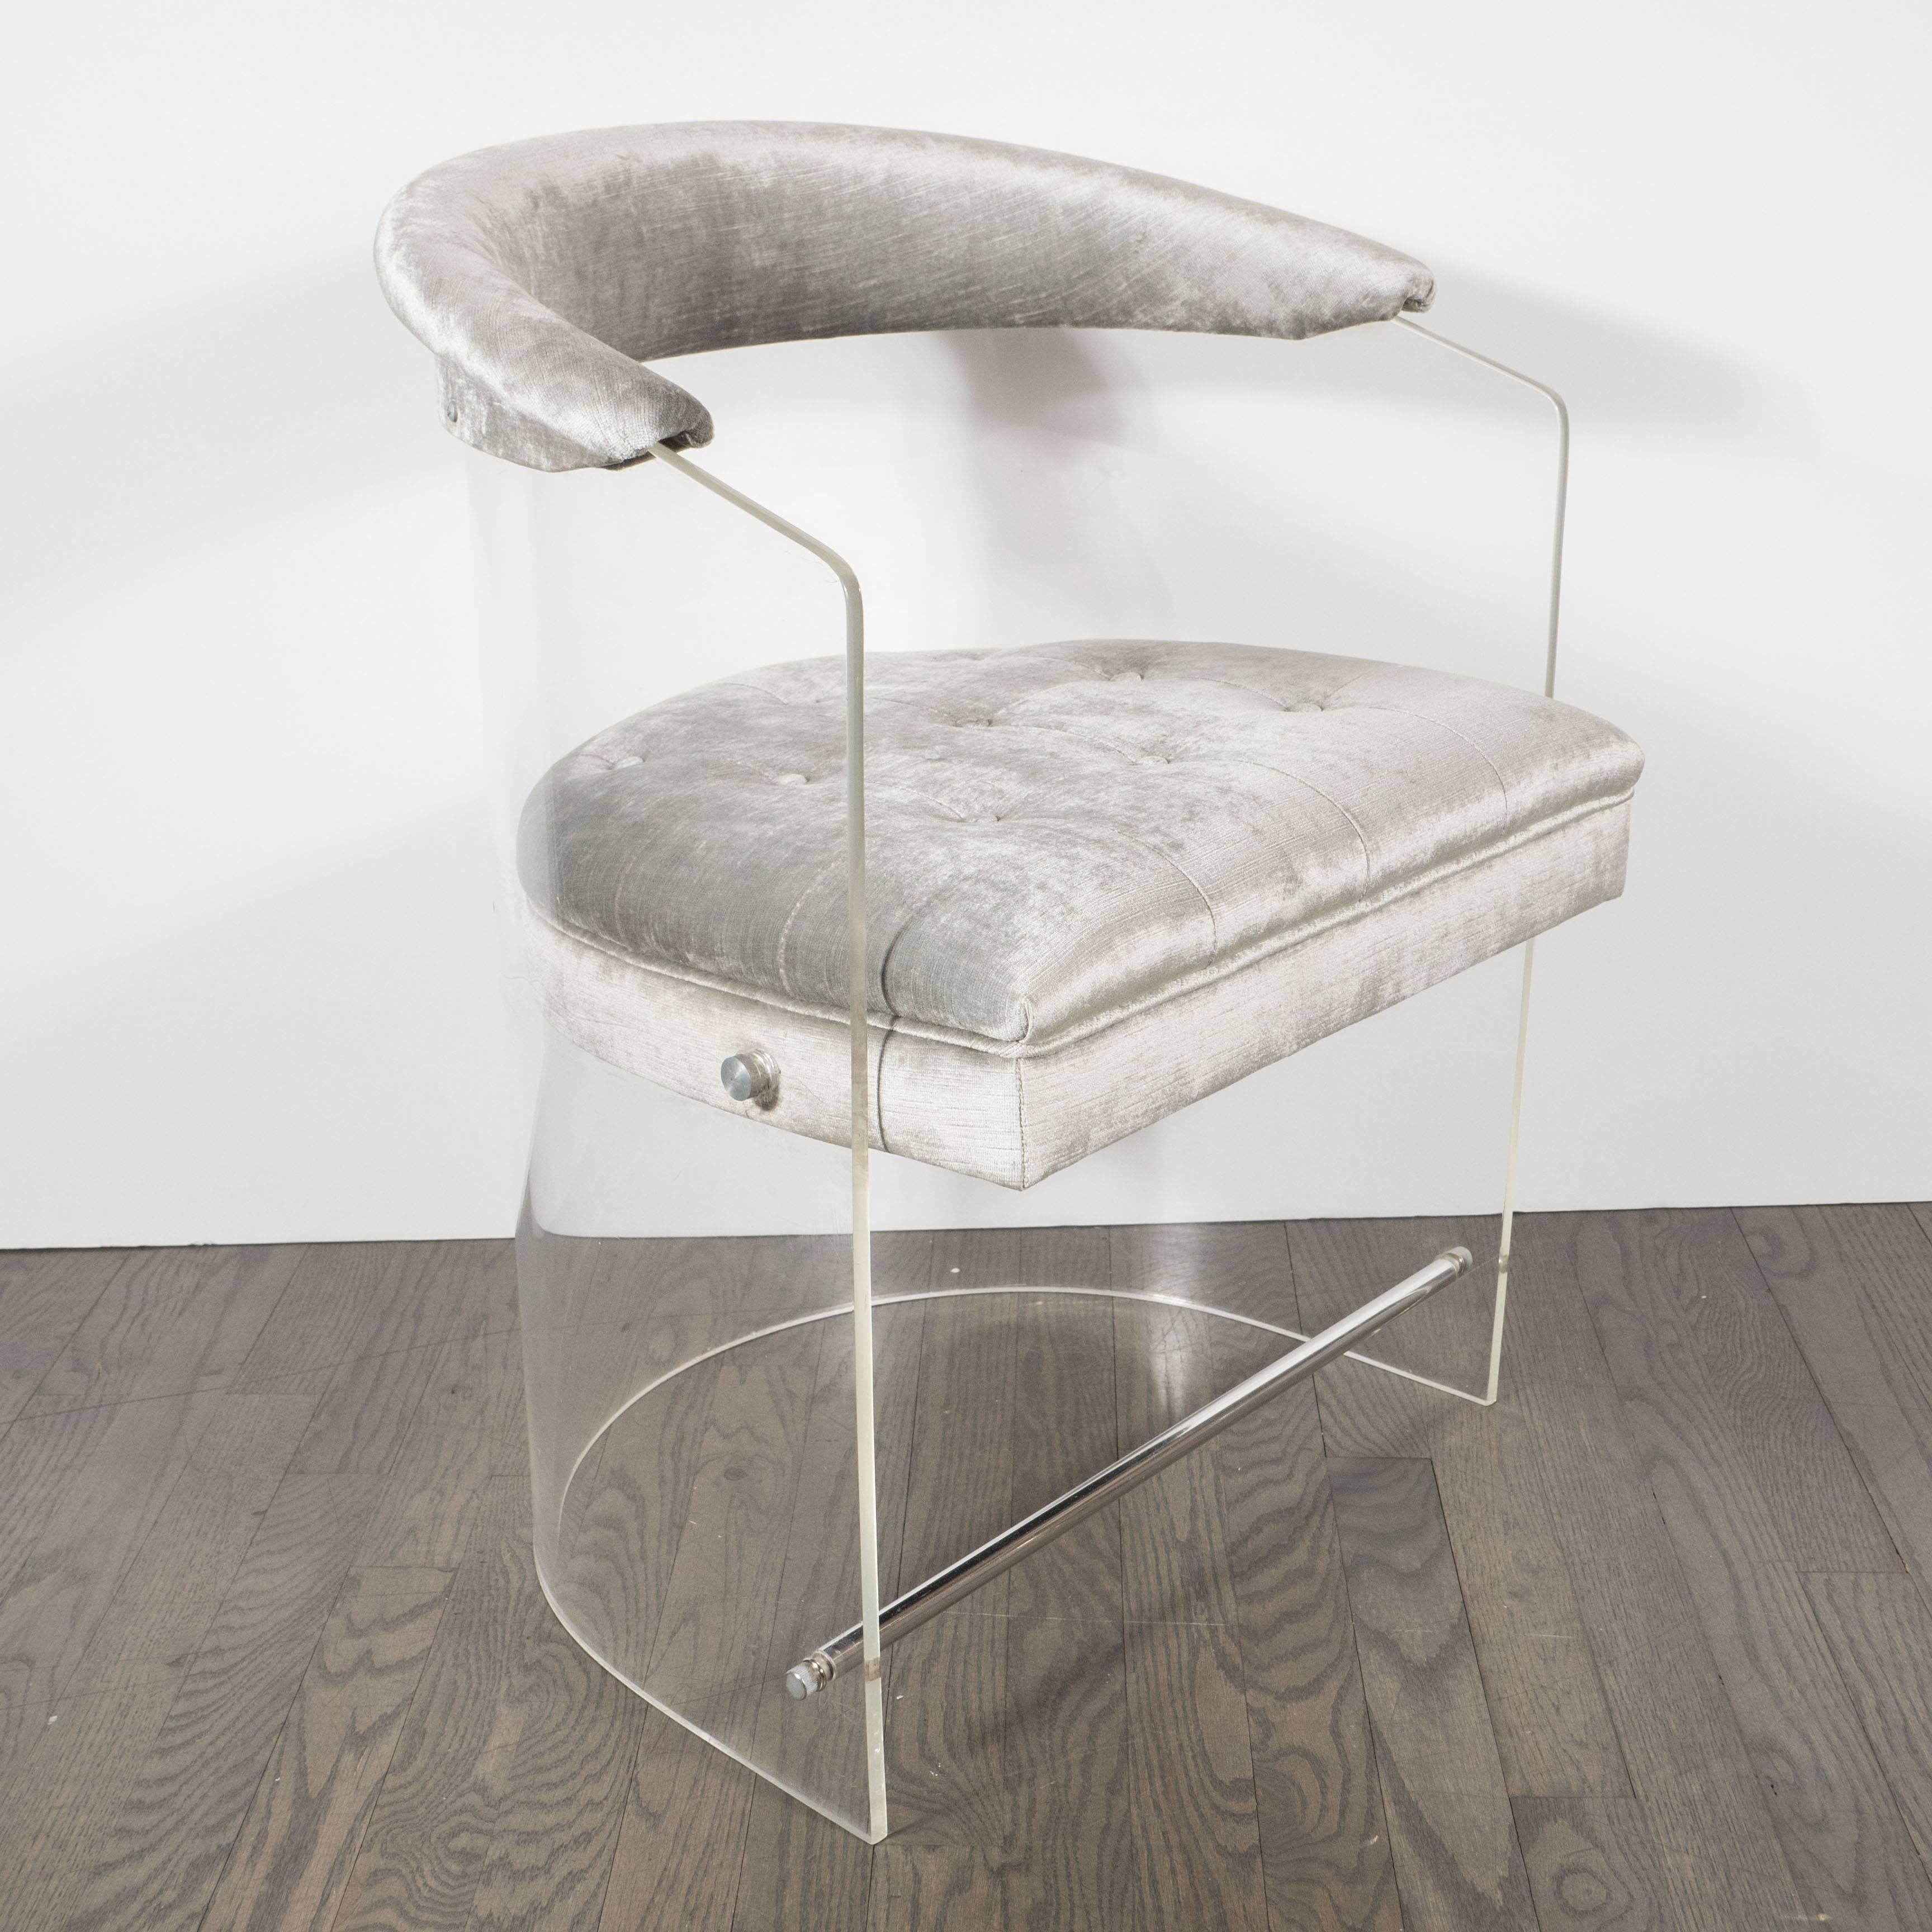 Late 20th Century Luxe Mid-Century Lucite and Chrome Wrap Around Chair in Platinum Velvet Fabric